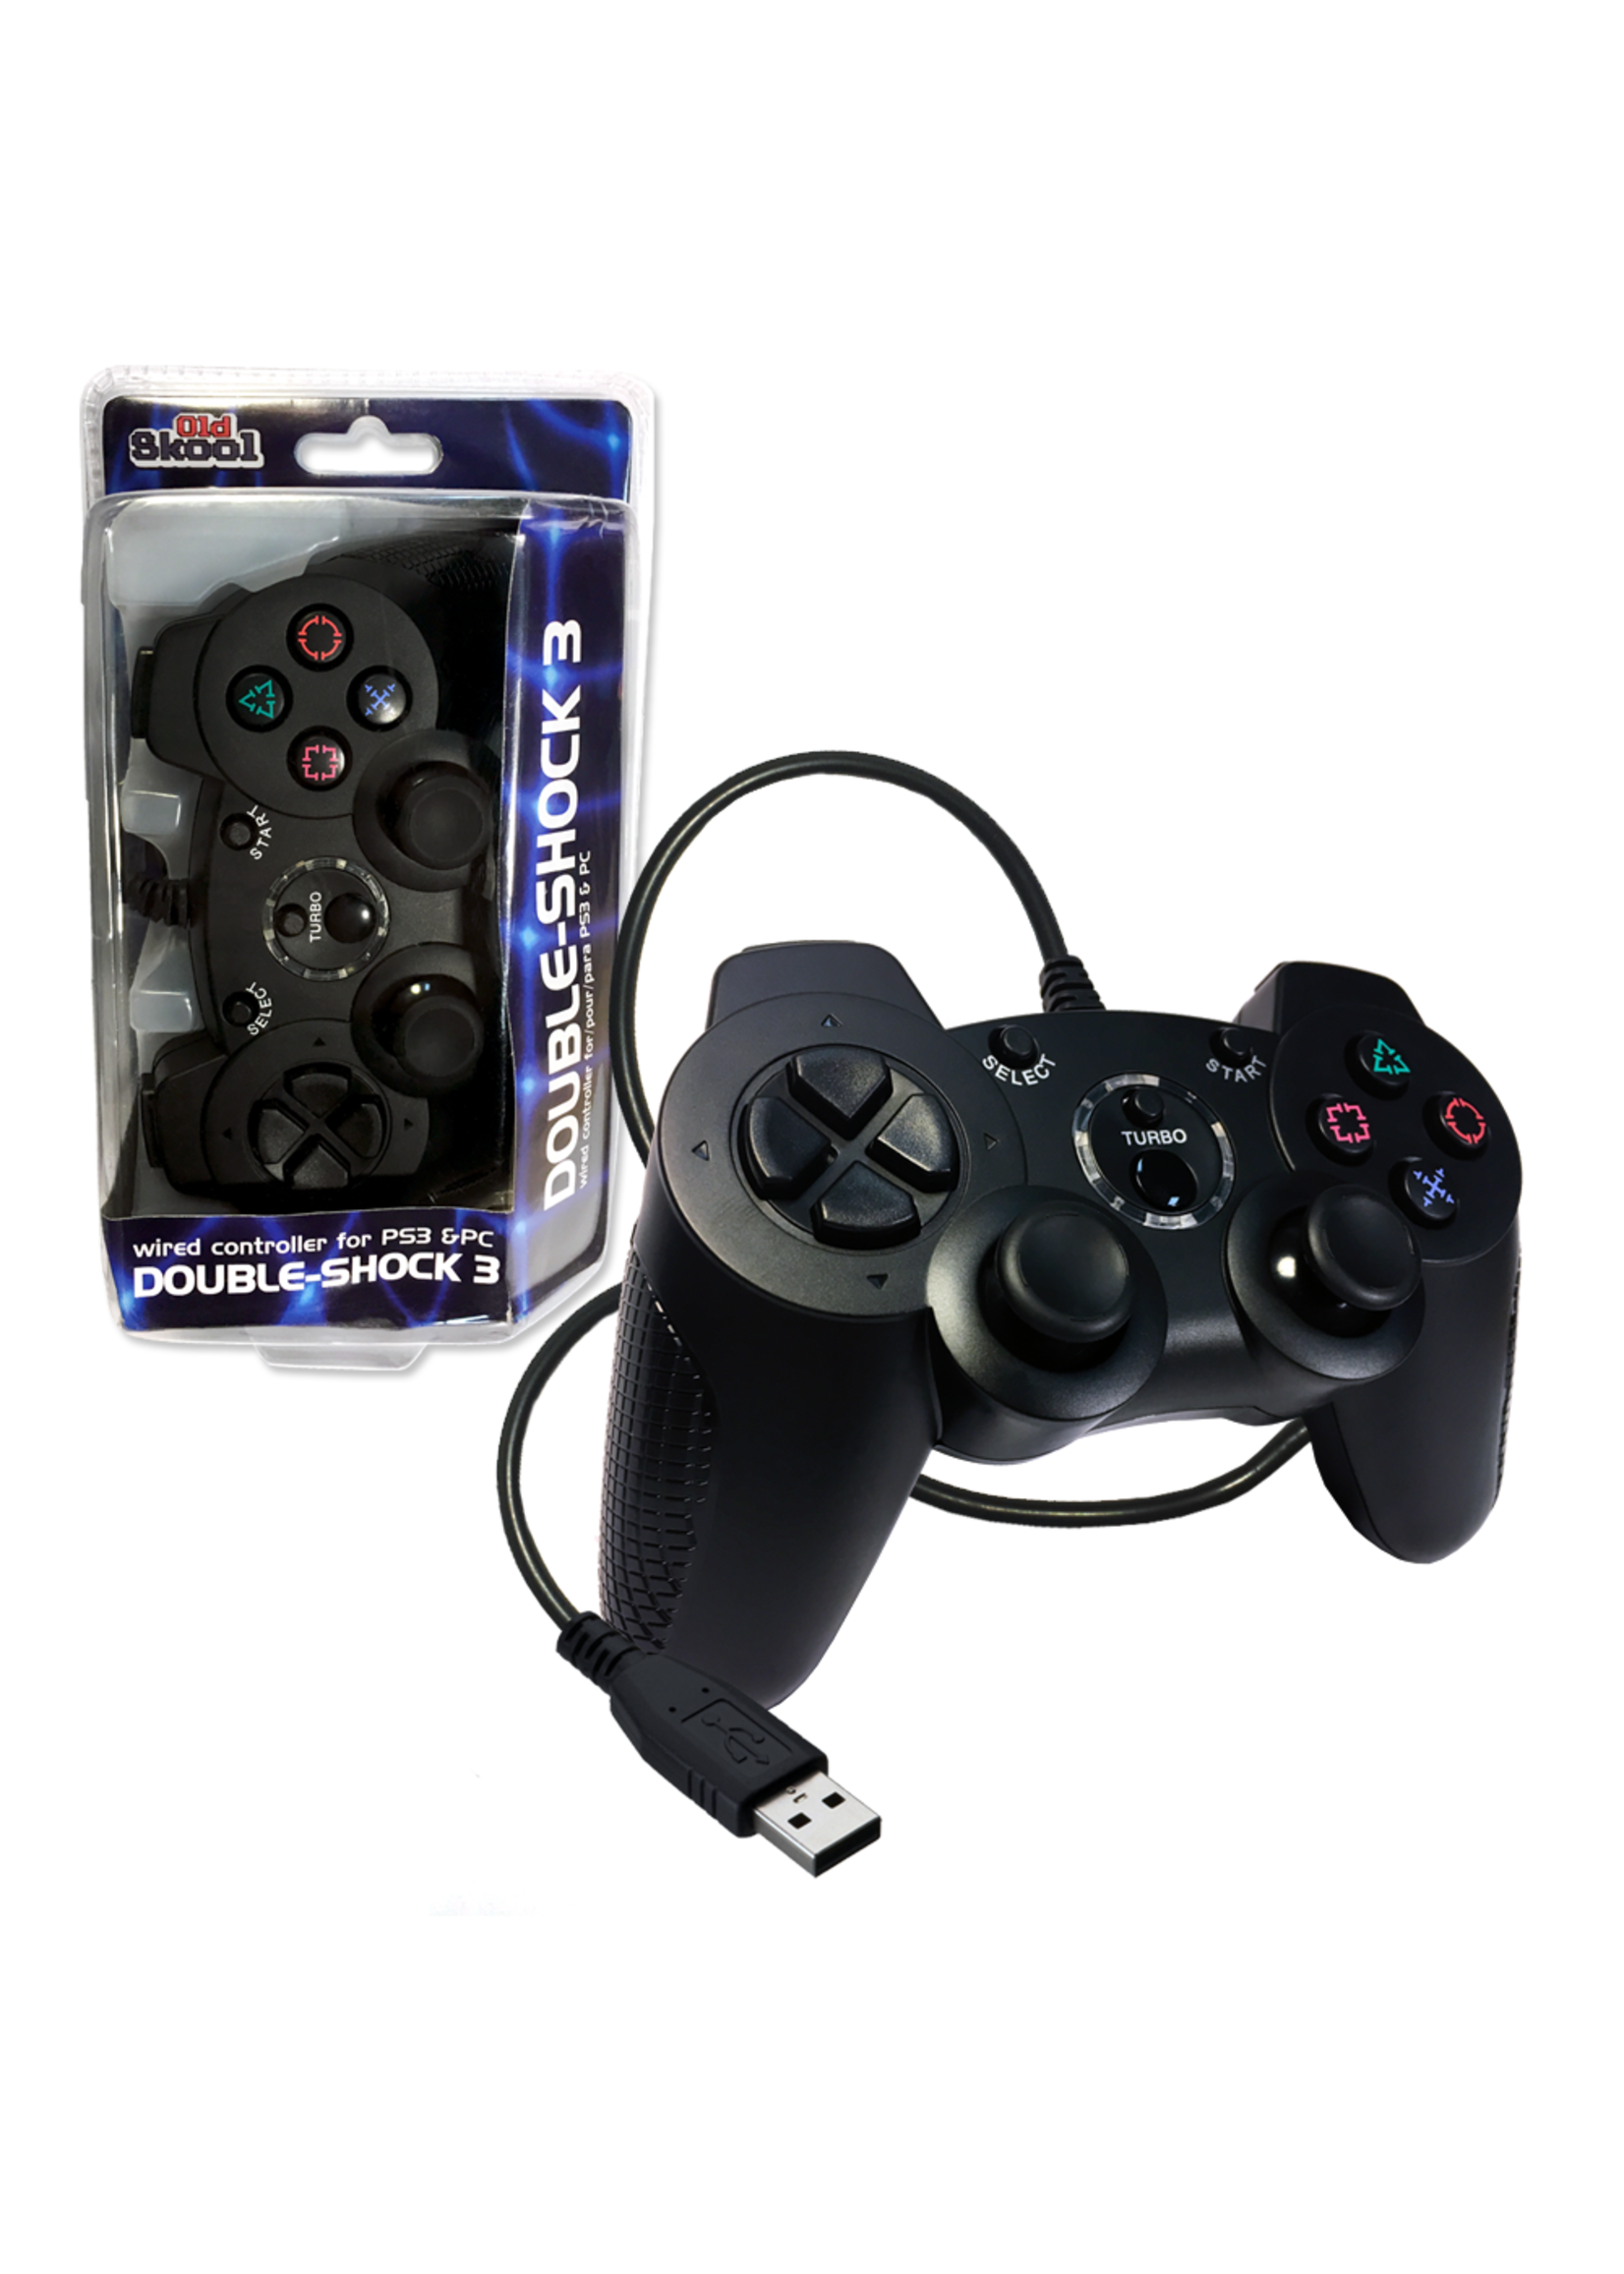 Sony Playstation 3 (PS3) PS3 Wired USB Controller - Black (VGA)